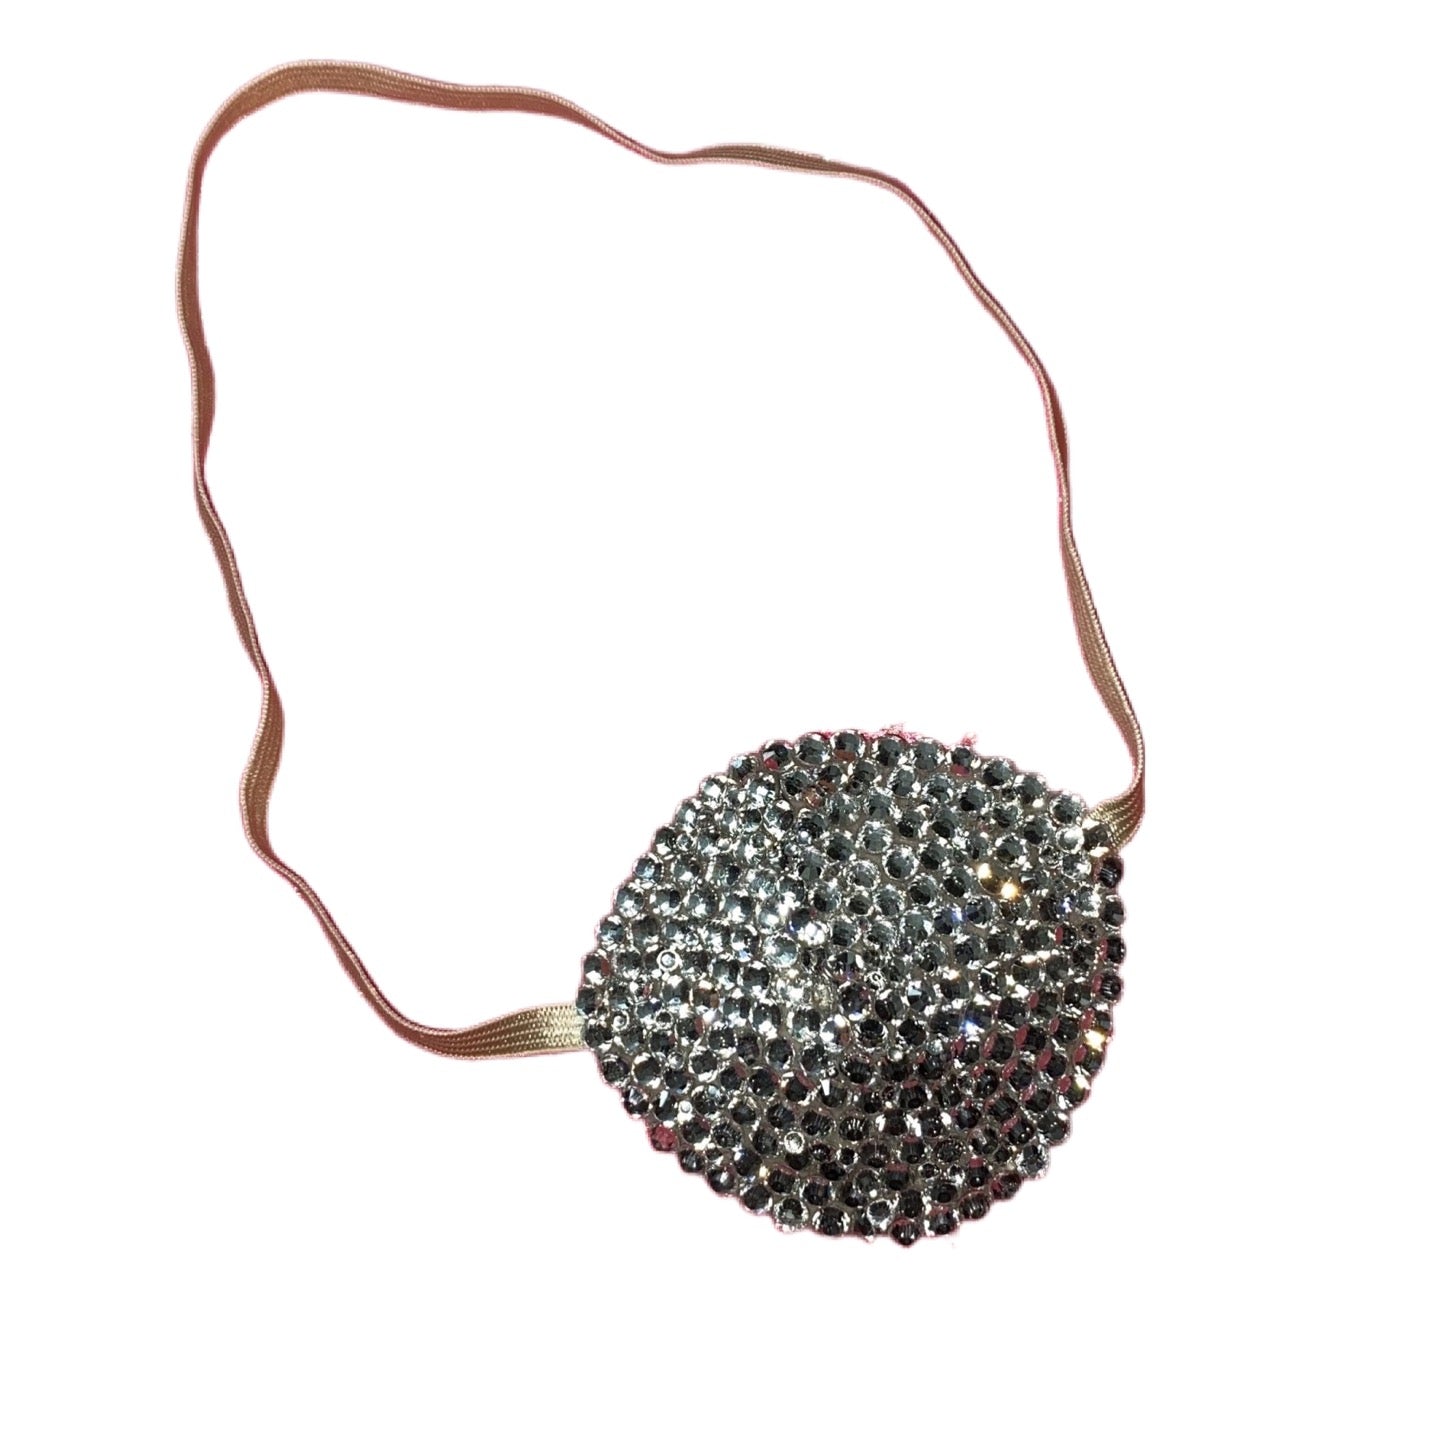 Nude/Skintone Crystal Bedazzled Eye Patch